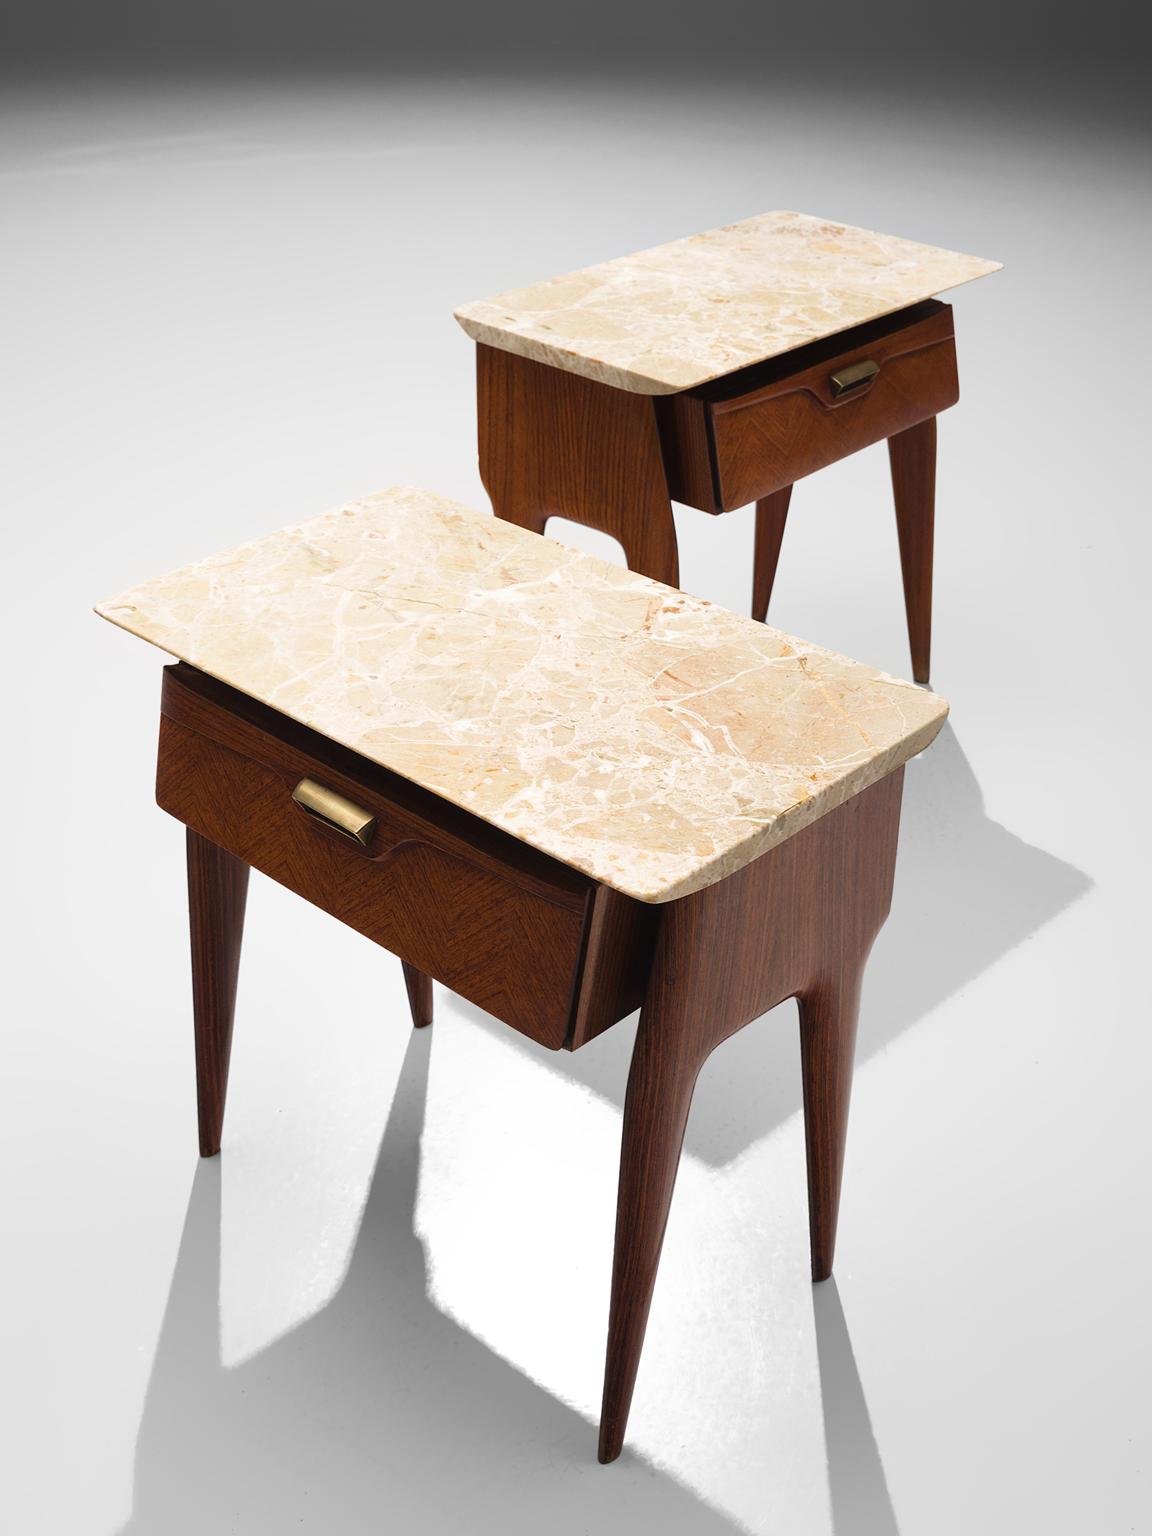 Side tables, wood, marble, brass, Italy, circa 1950.

These two side tables or nightstands are both refined and elegant in every way. The marble top stretches a little but over the outer edges of the tapered legs. These sculptural Italian tables